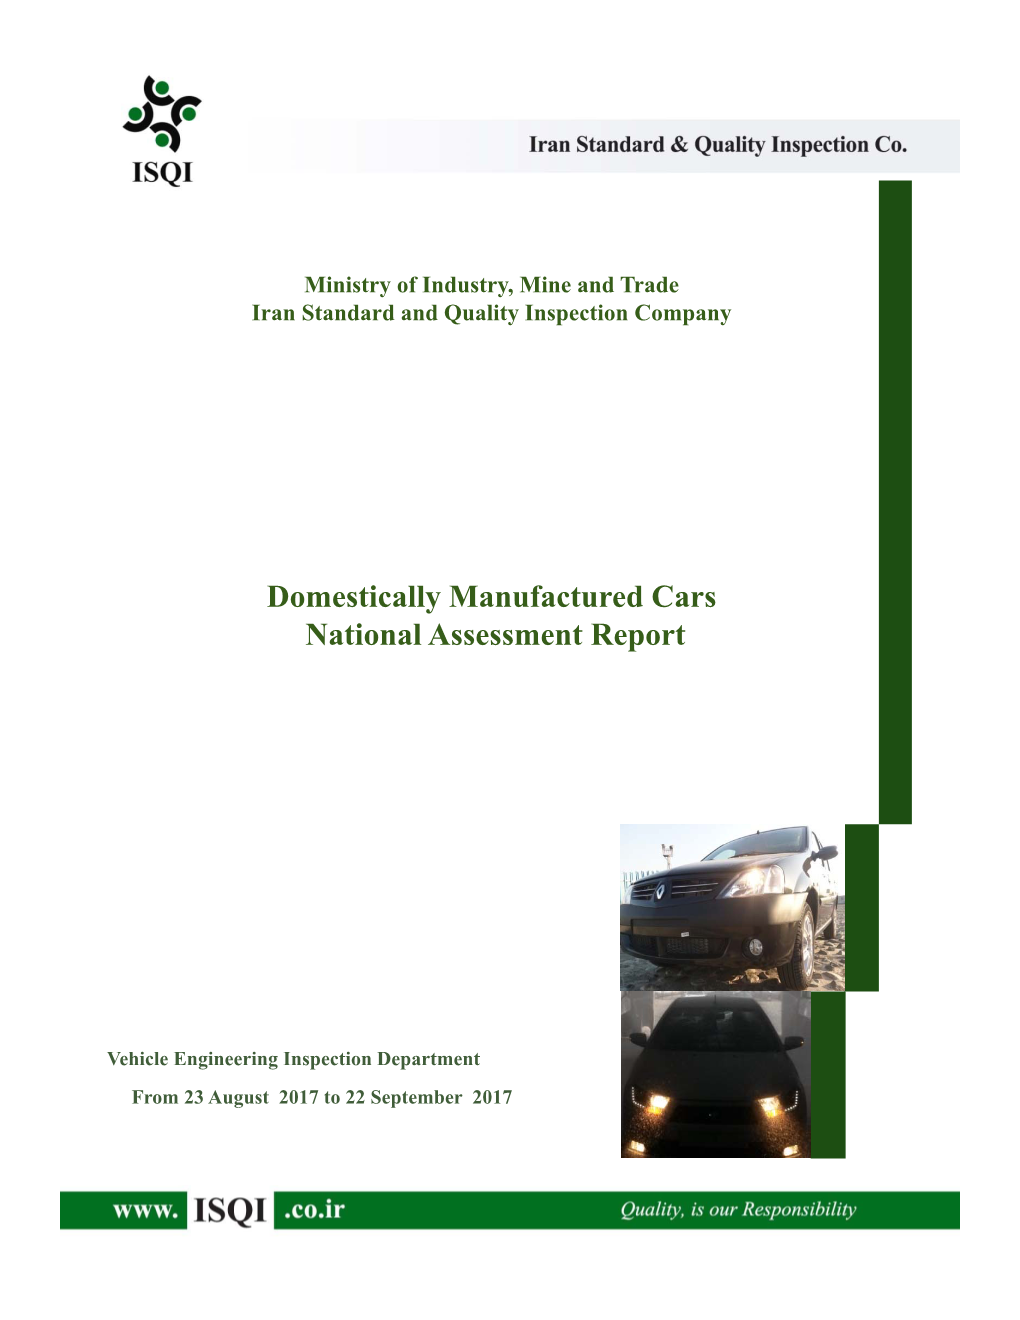 Domestically Manufactured Cars National Assessment Report